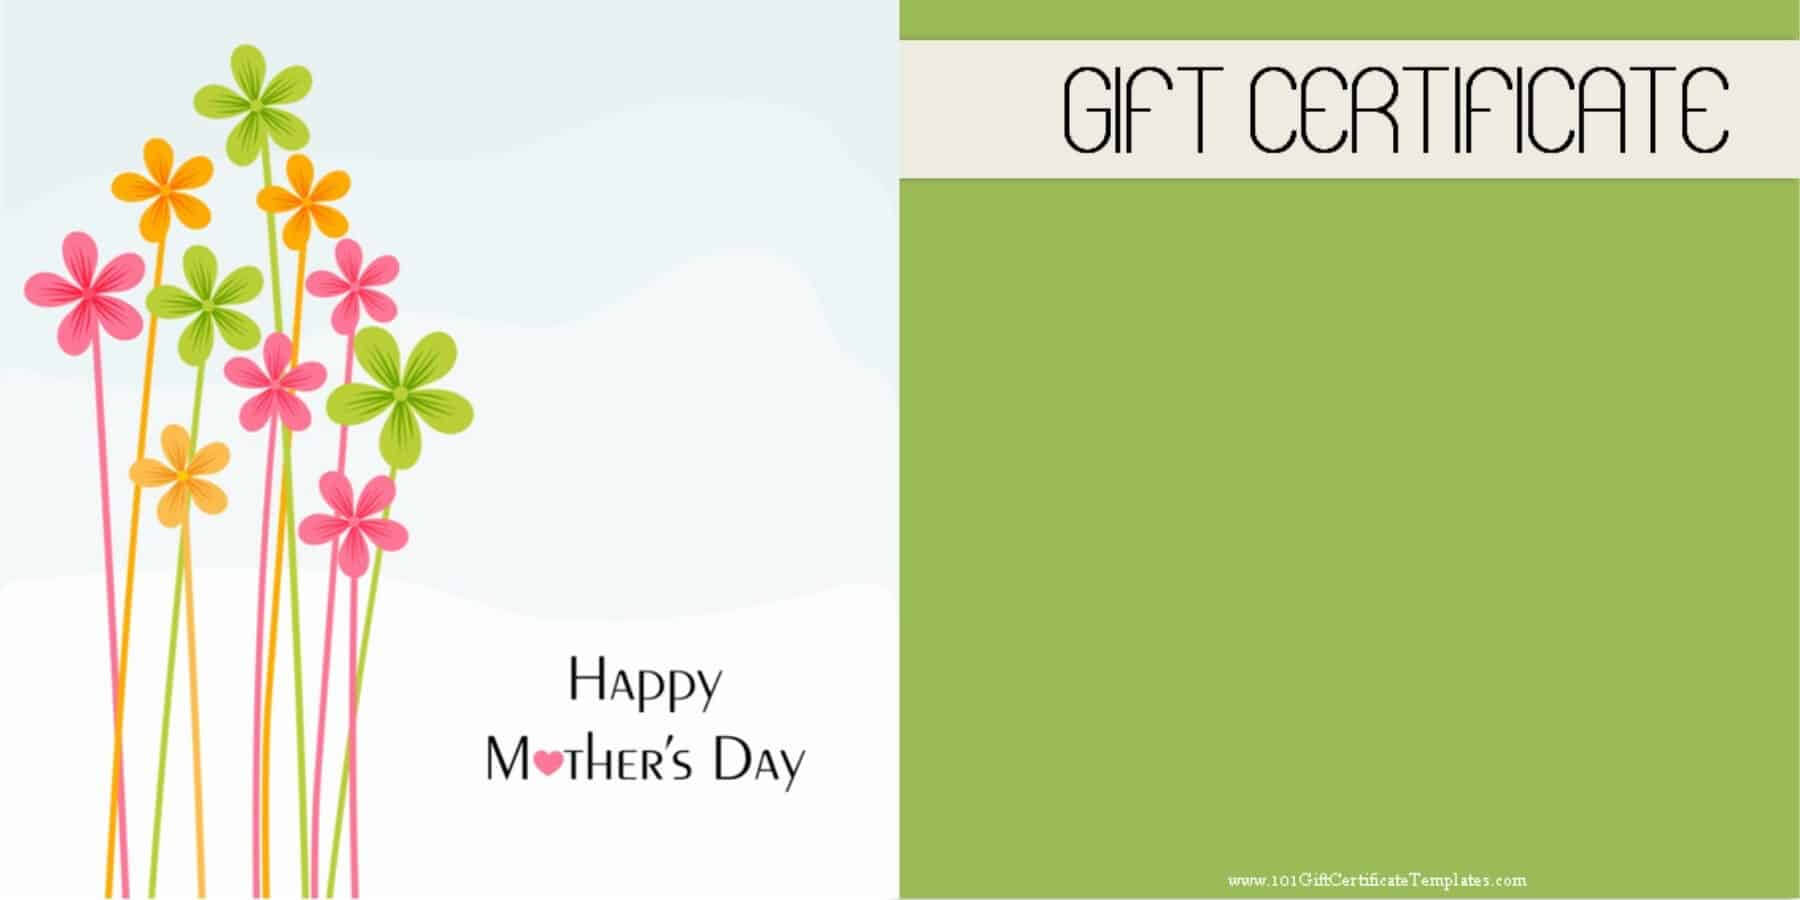 Mother's Day Gift Certificate Templates In Spa Day Gift Inside Spa Day Gift Certificate Template